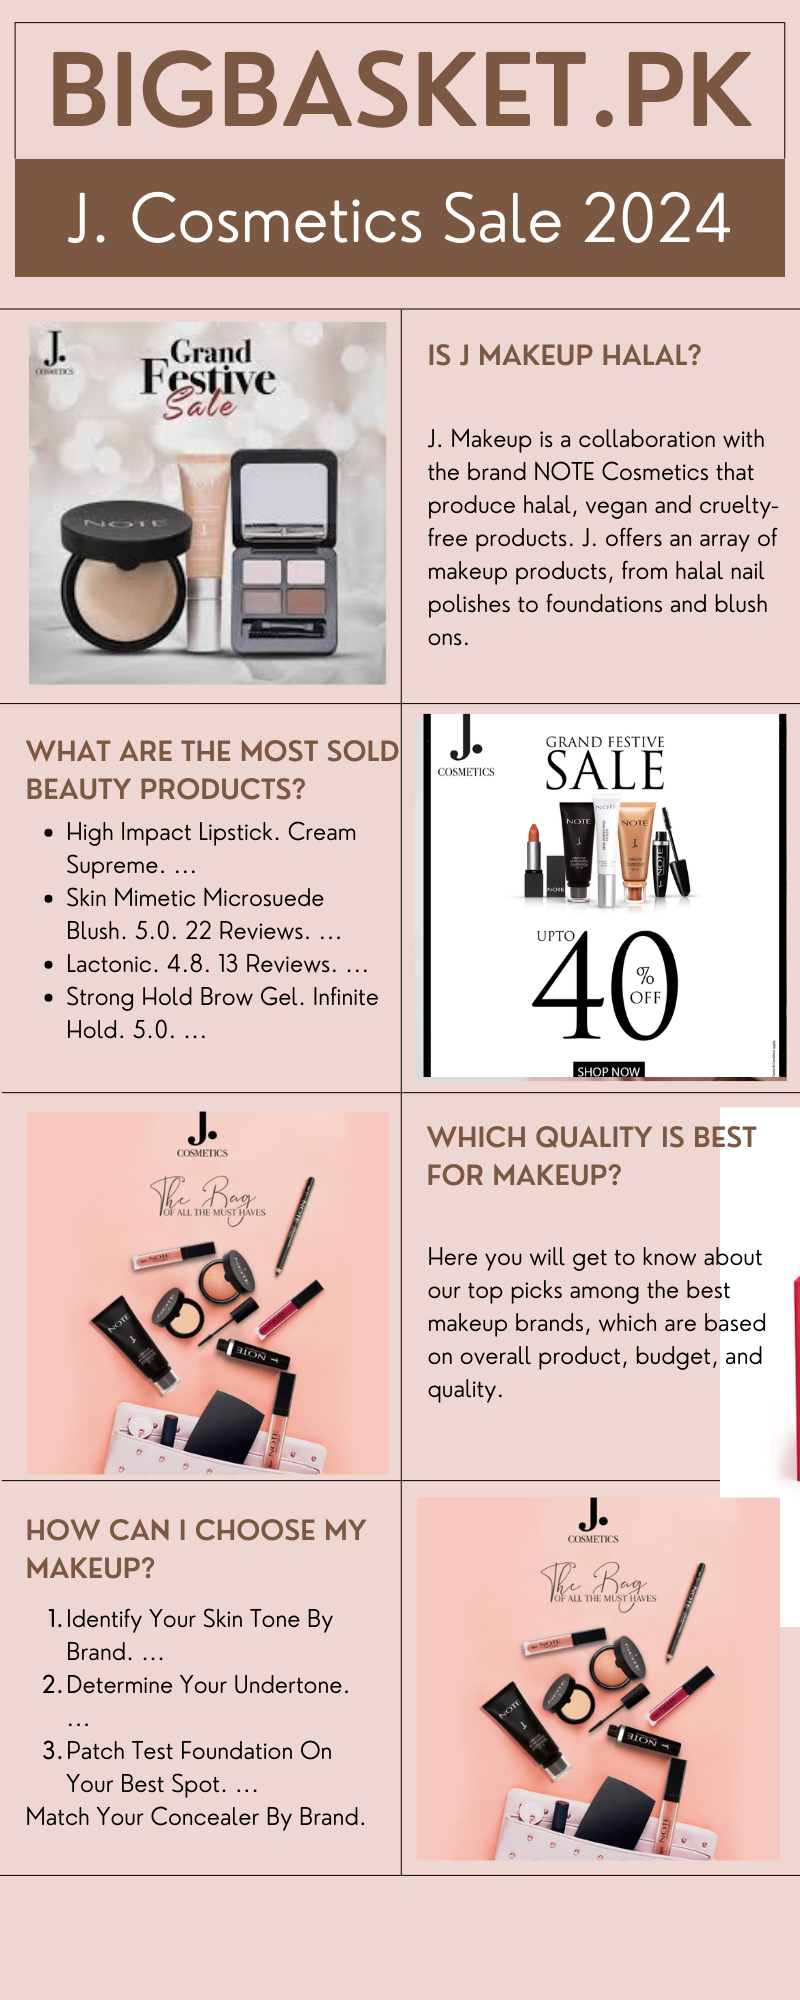 J. Cosmetics Sale 2024: Limited Time Offers Top Beauty Essentials